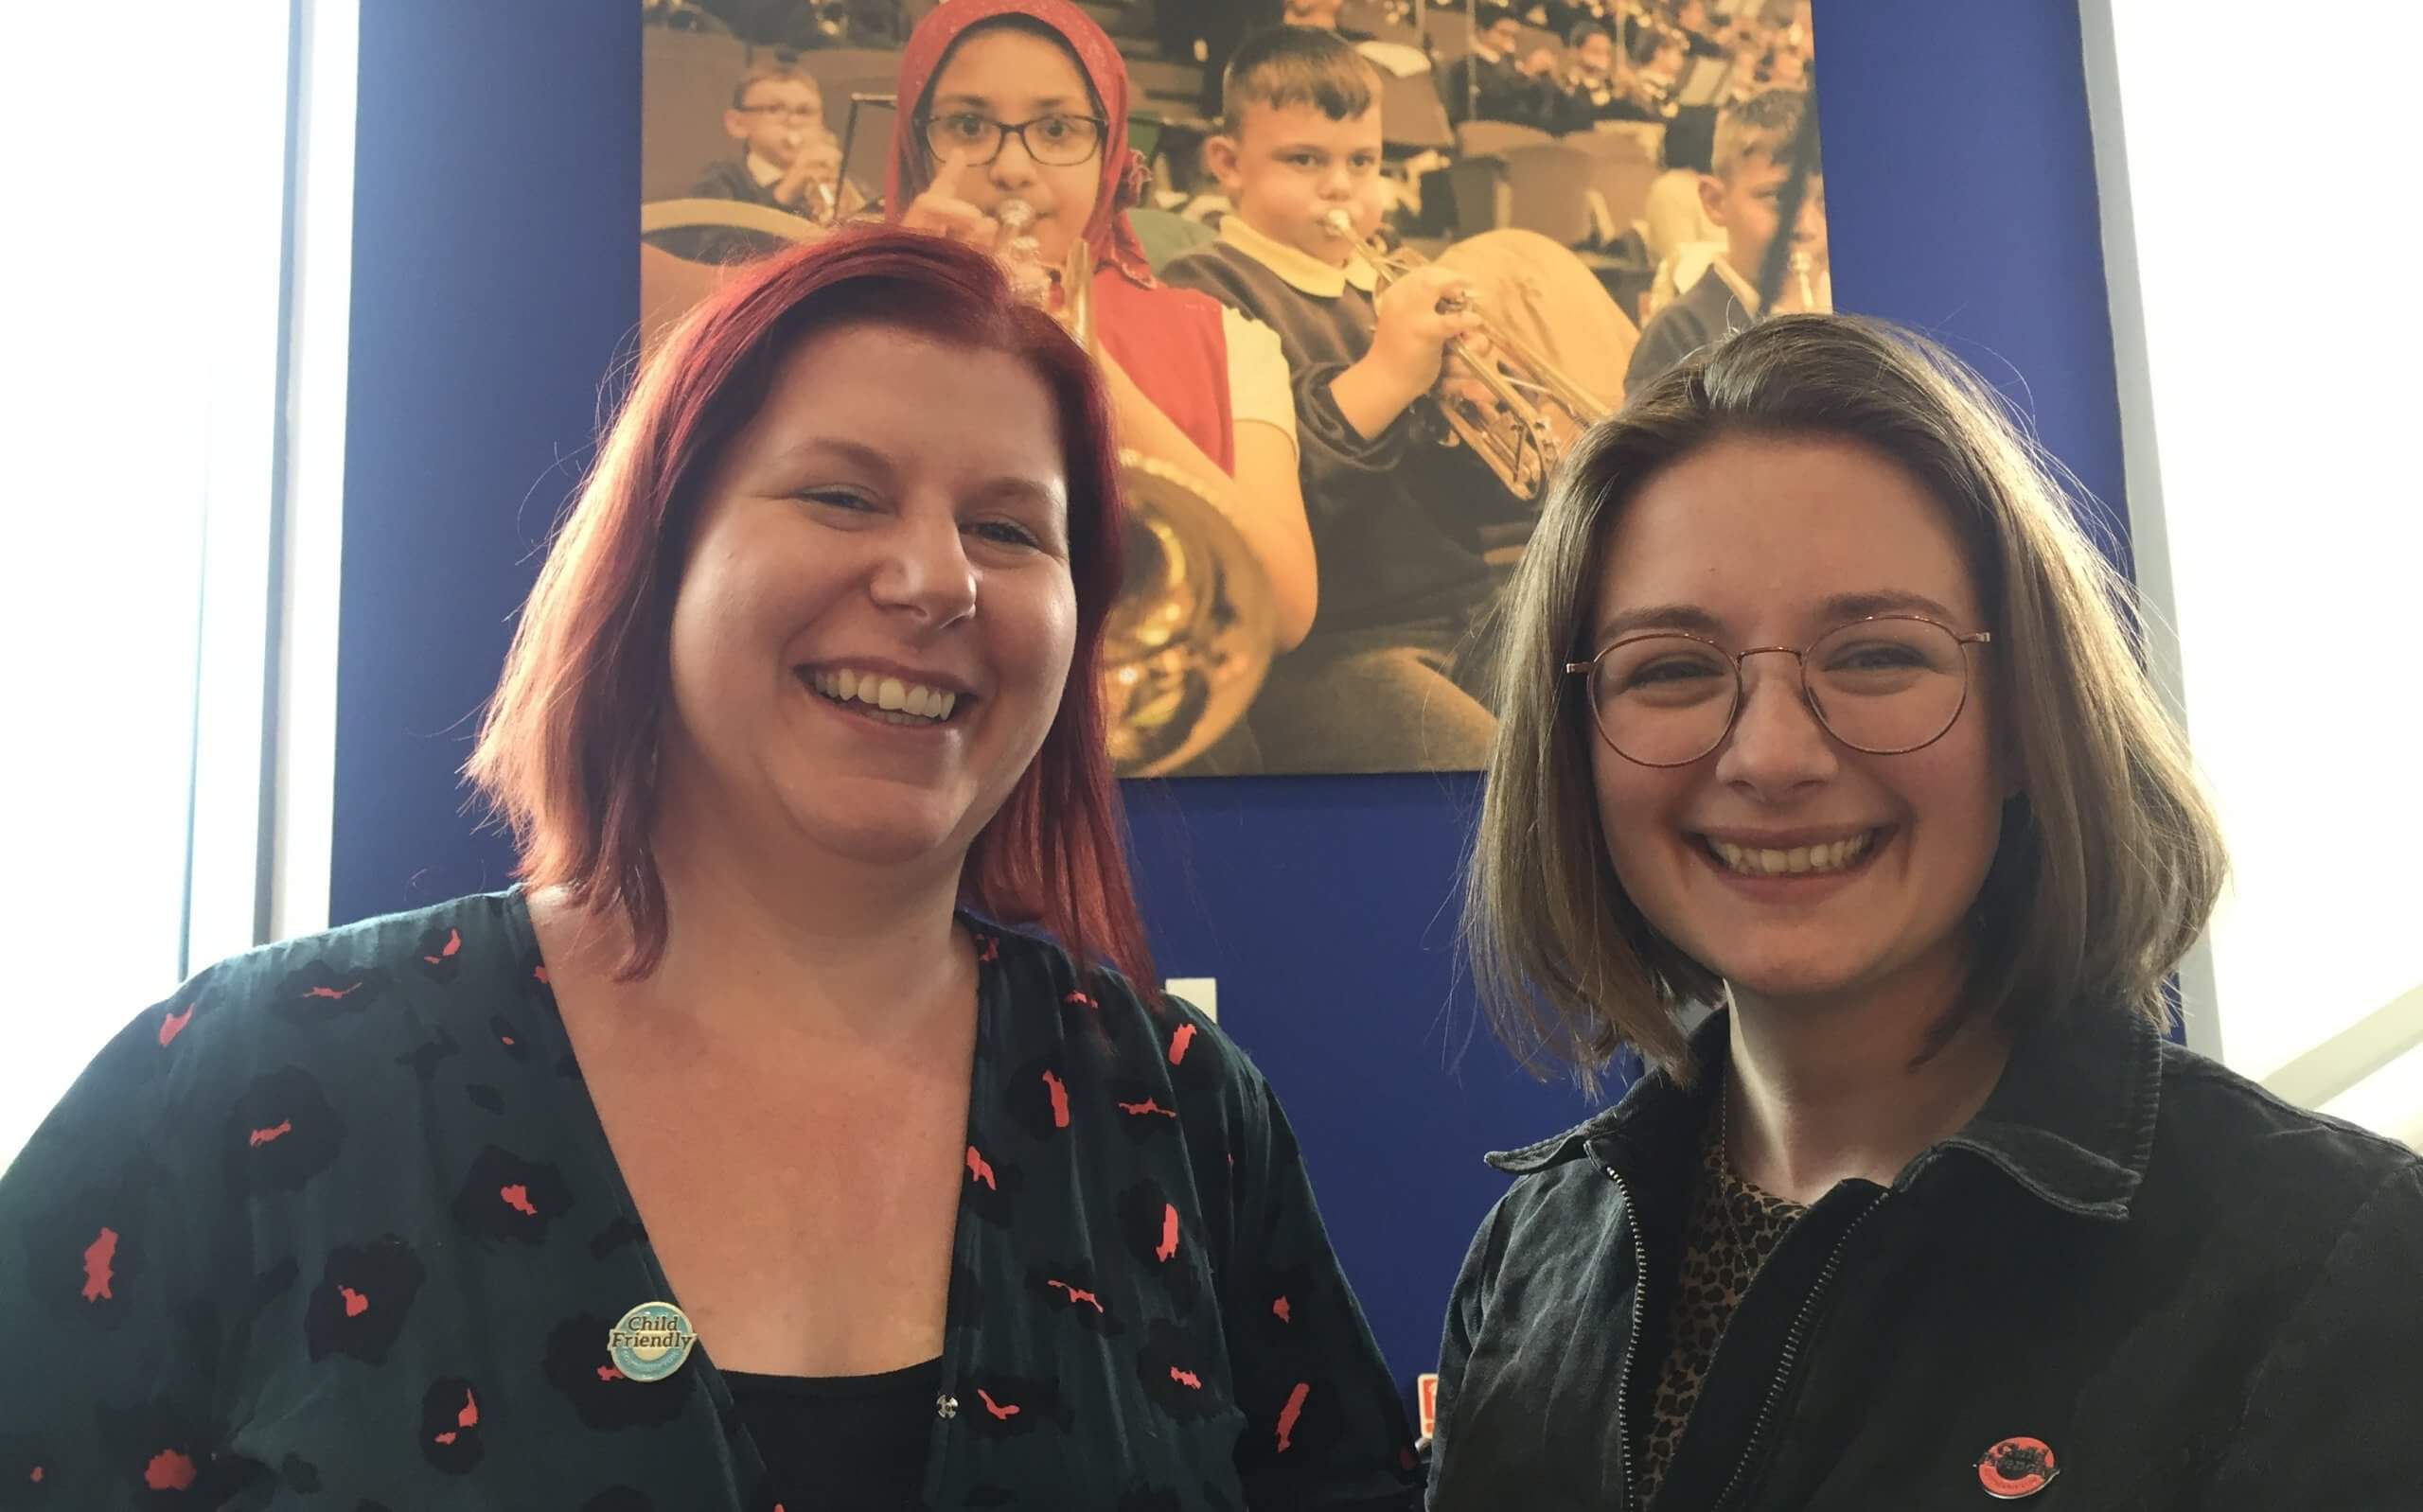 New SCEP team members: Jodie Sadler on the left is a white woman with red hair and Frankie McCormick on the right has brown hair and glasses. They are both smiling and standing in front on photograph of children playing musical instruments. 